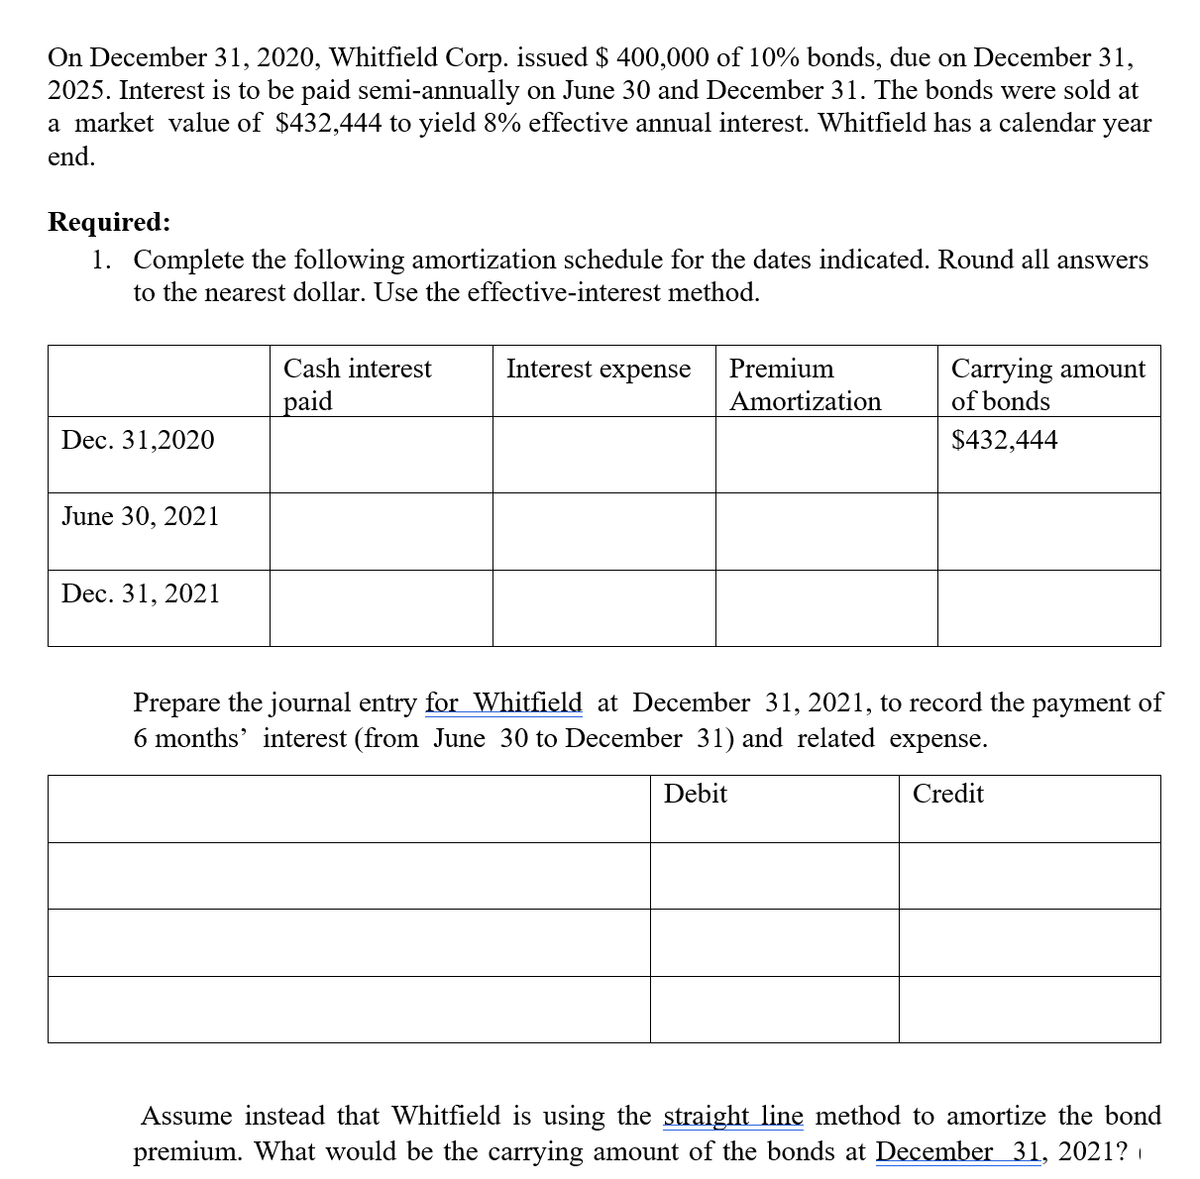 On December 31, 2020, Whitfield Corp. issued $ 400,000 of 10% bonds, due on December 31,
2025. Interest is to be paid semi-annually on June 30 and December 31. The bonds were sold at
a market value of $432,444 to yield 8% effective annual interest. Whitfield has a calendar year
end.
Required:
1. Complete the following amortization schedule for the dates indicated. Round all answers
to the nearest dollar. Use the effective-interest method.
Carrying amount
of bonds
Cash interest
Interest expense
Premium
paid
Amortization
Dec. 31,2020
$432,444
June 30, 2021
Dec. 31, 2021
Prepare the journal entry for Whitfield at December 31, 2021, to record the payment of
6 months' interest (from June 30 to December 31) and related expense.
Debit
Credit
Assume instead that Whitfield is using the straight line method to amortize the bond
premium. What would be the carrying amount of the bonds at December 31, 2021?
